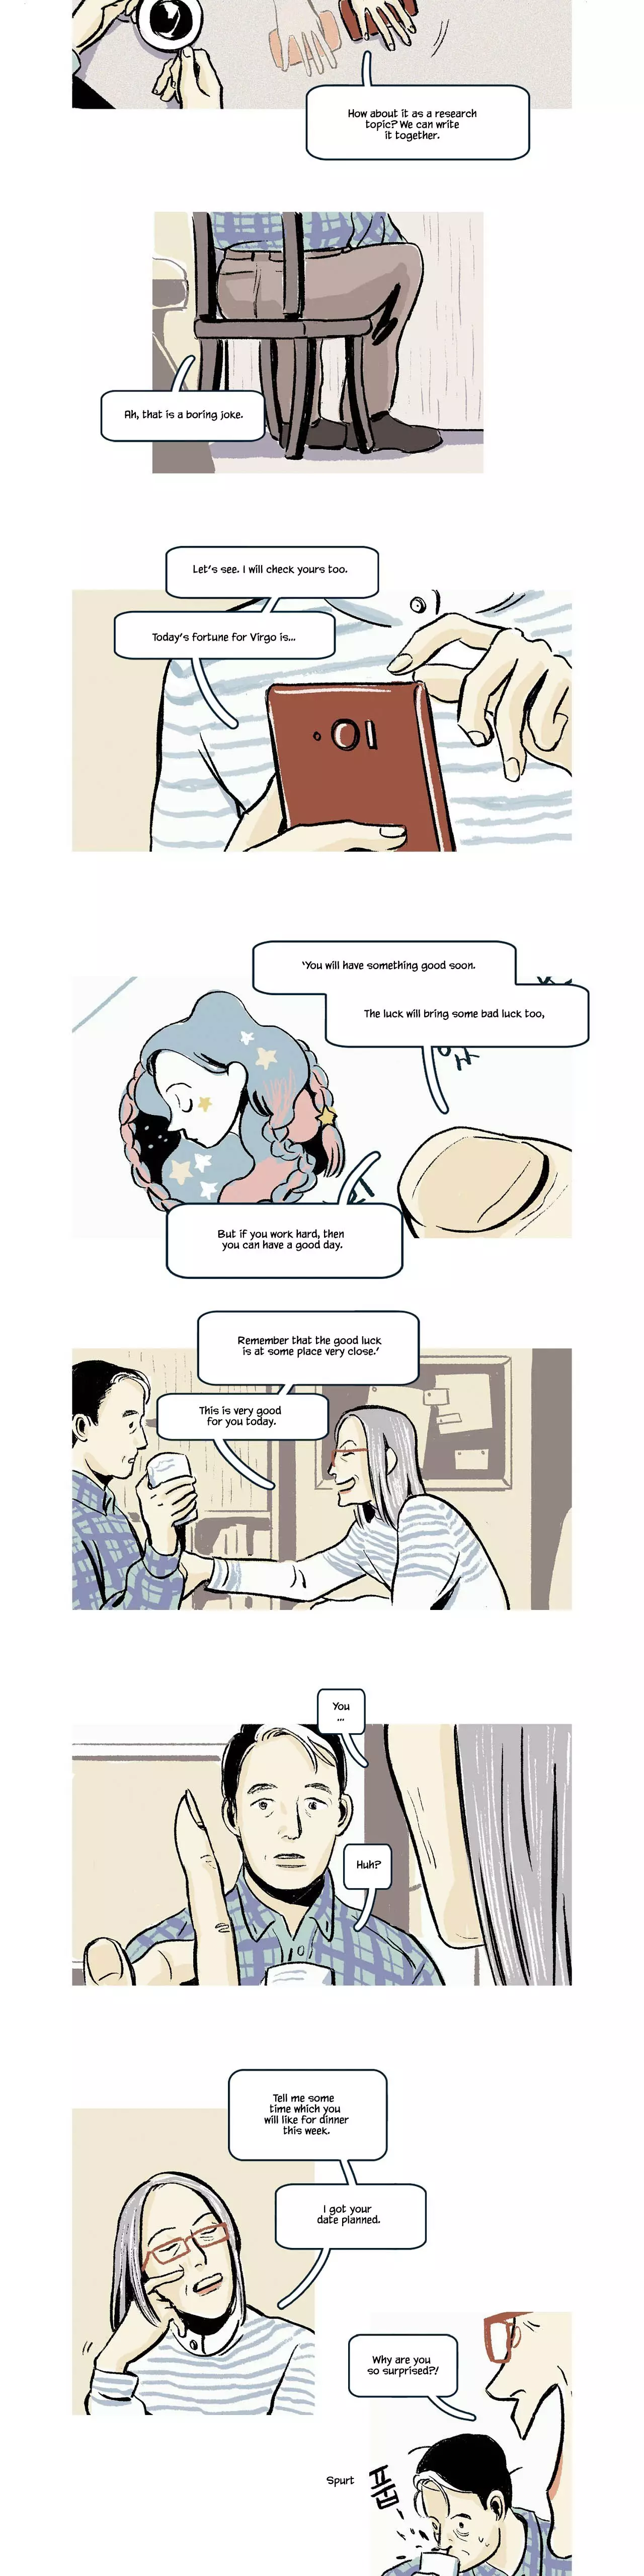 The Professor Who Reads Love Stories - 9 page 5-2107717b